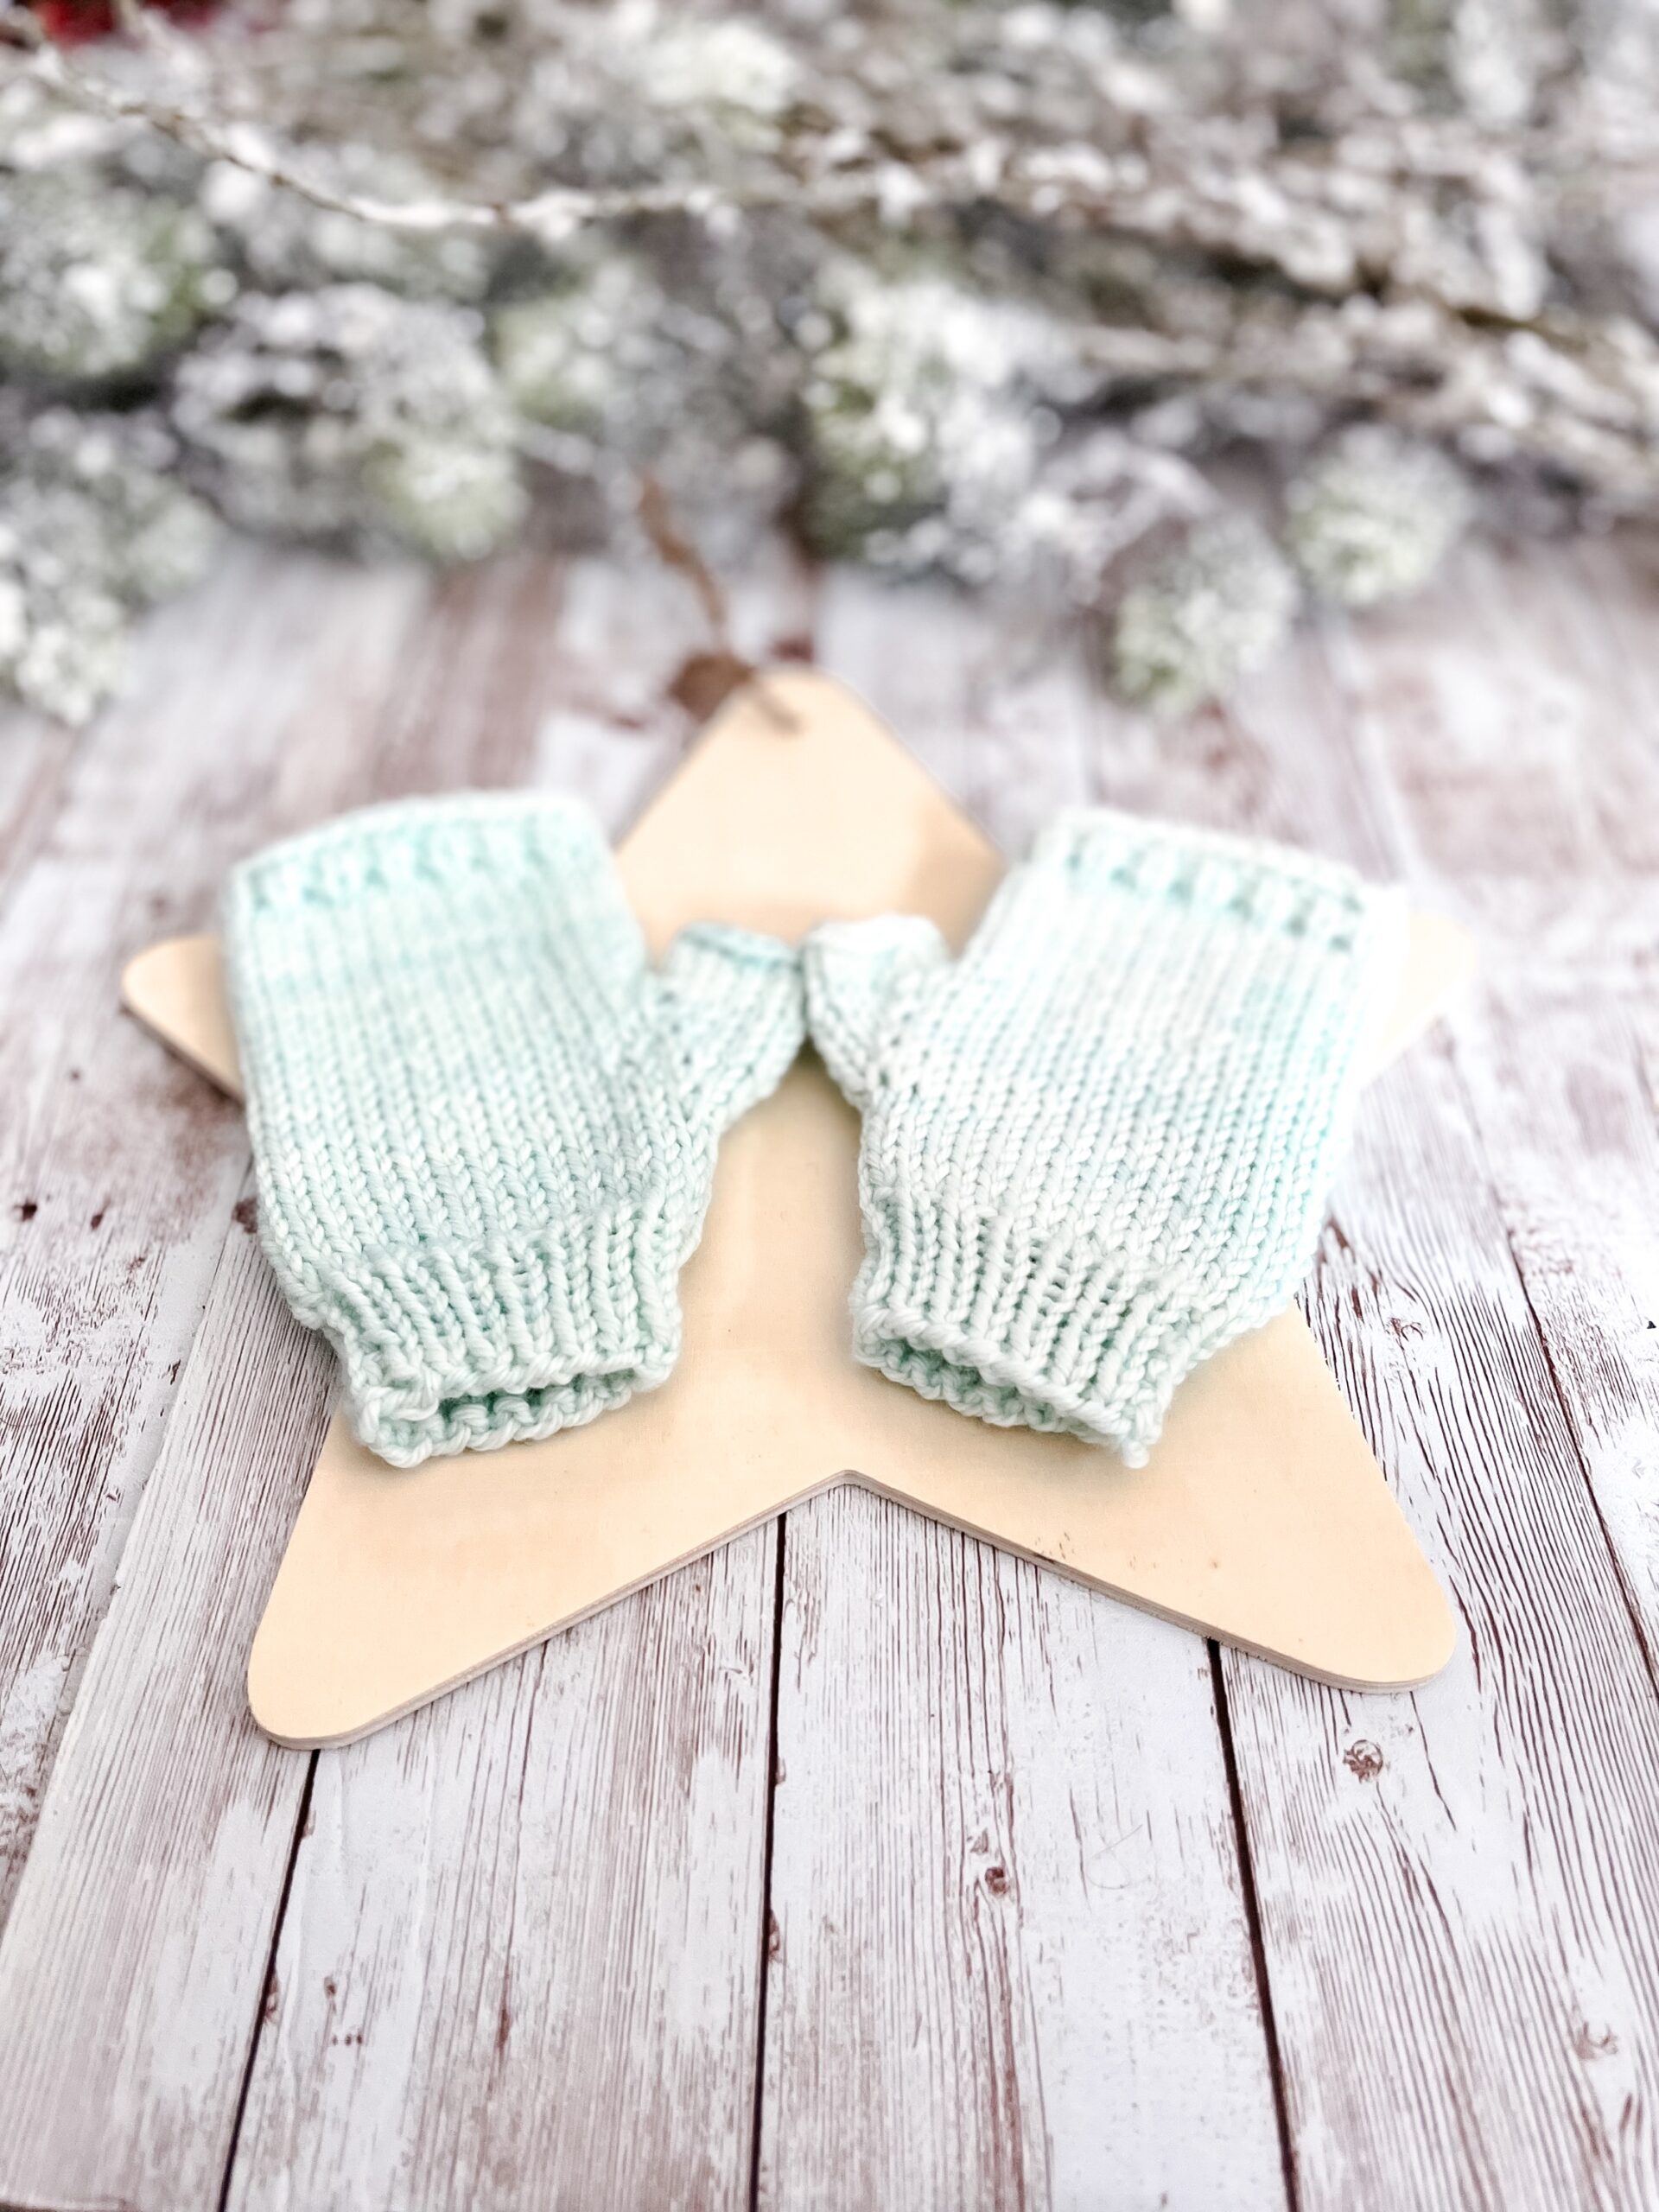 A pair of dark blue fingerless mittens rests on a wooden star cutout on a wood plank background. In the background of the photo is snow covered pine branches